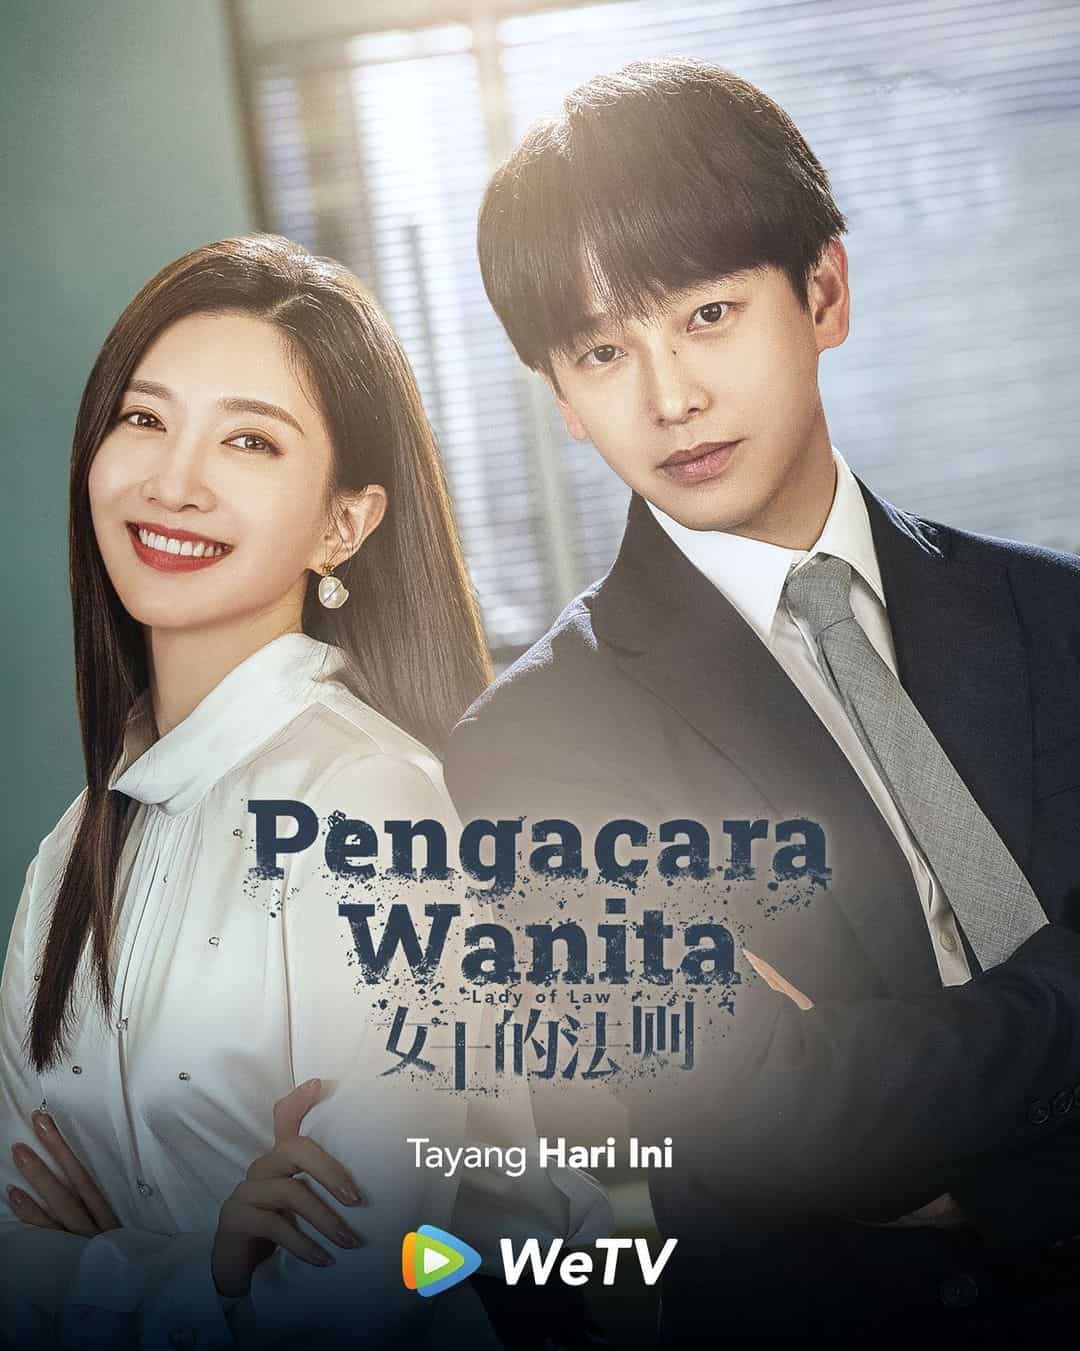 Lady of Law - Sinopsis, Pemain, OST, Episode, Review